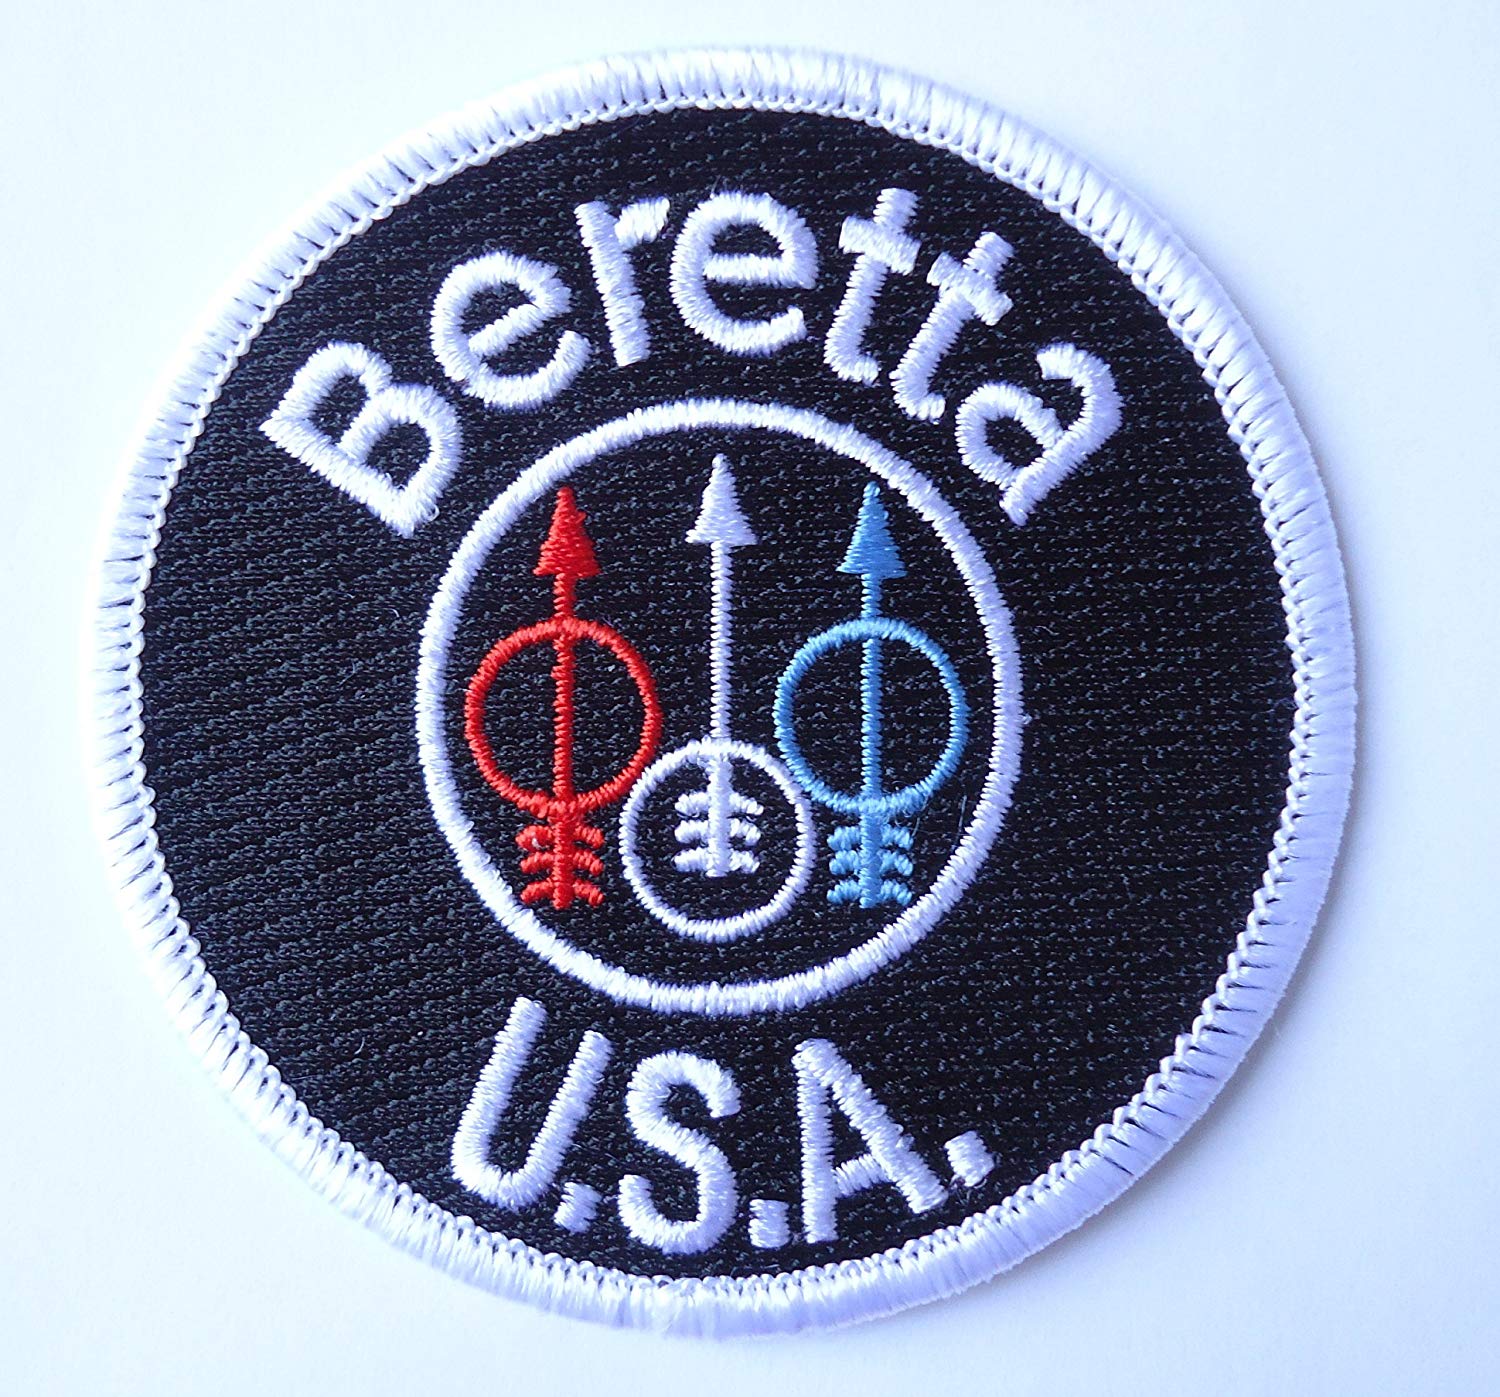 Beretta USA Logo - Amazon.com: Beretta USA embroidered patch 3 inches: Everything Else